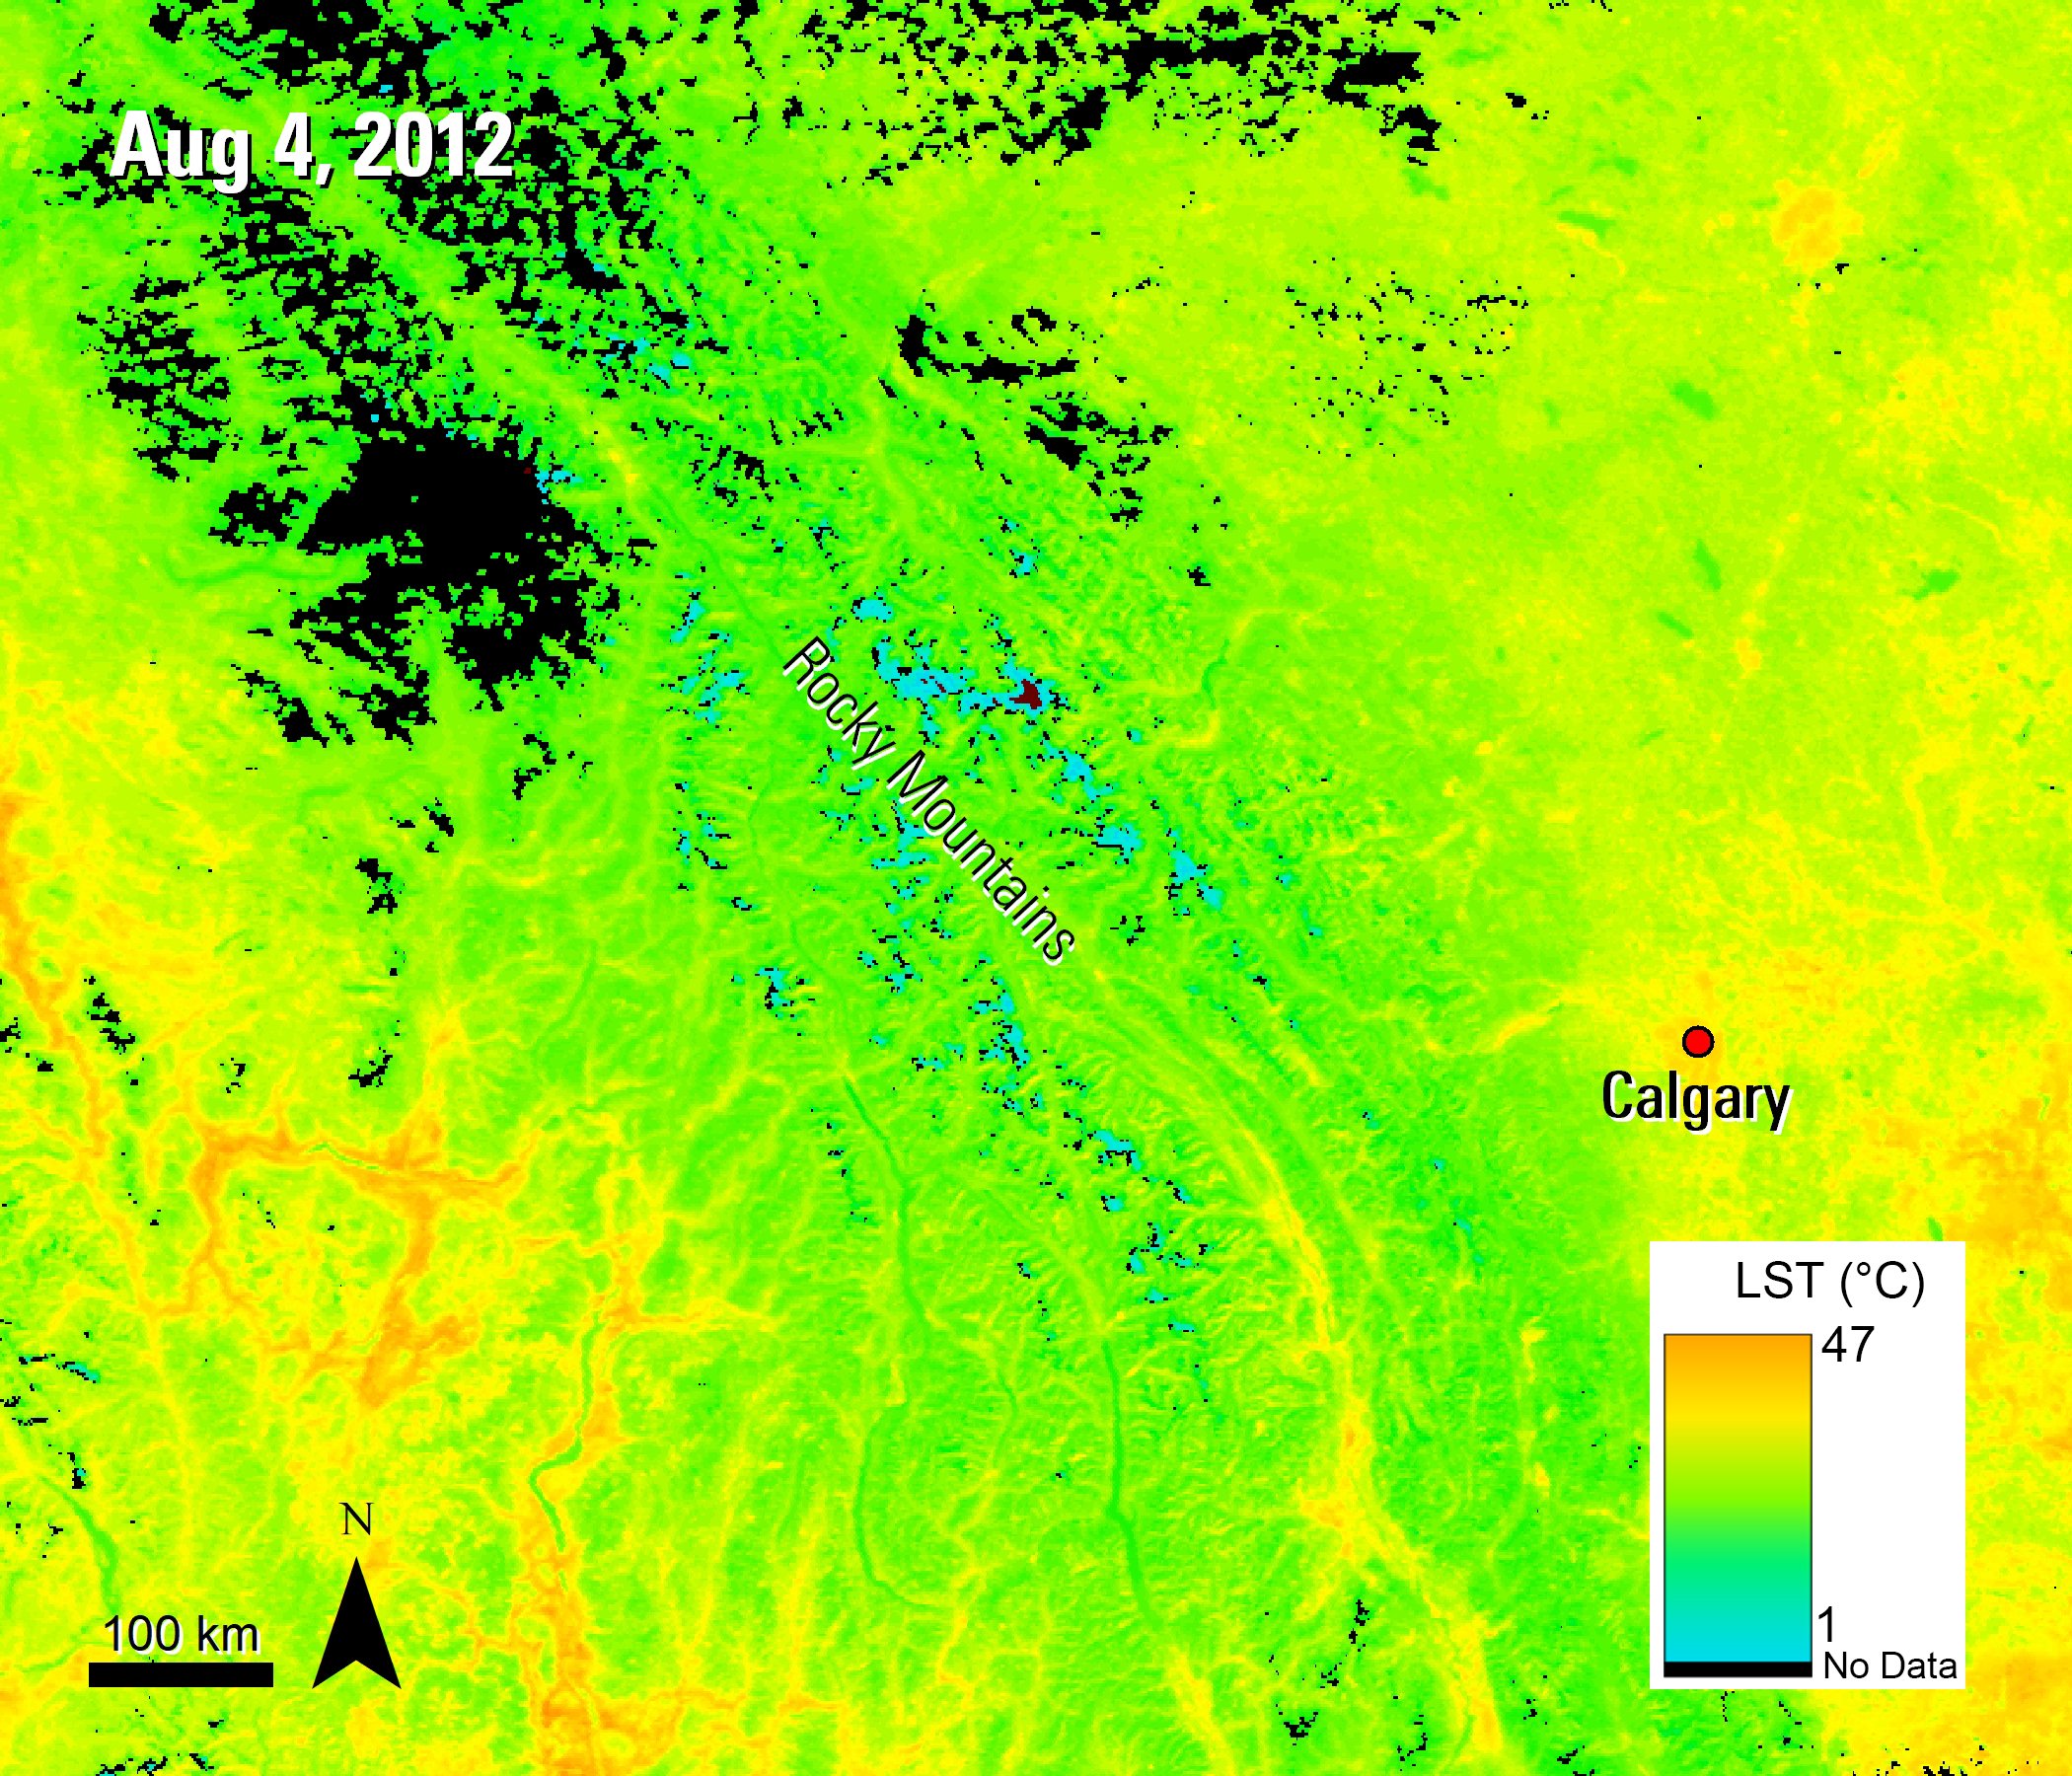 A land surface temperature image of Western Alberta, Canada. Temperatures near the Rocky Mountains are colder, as indicated by the blue and green shades, acquired August 4, 2012.